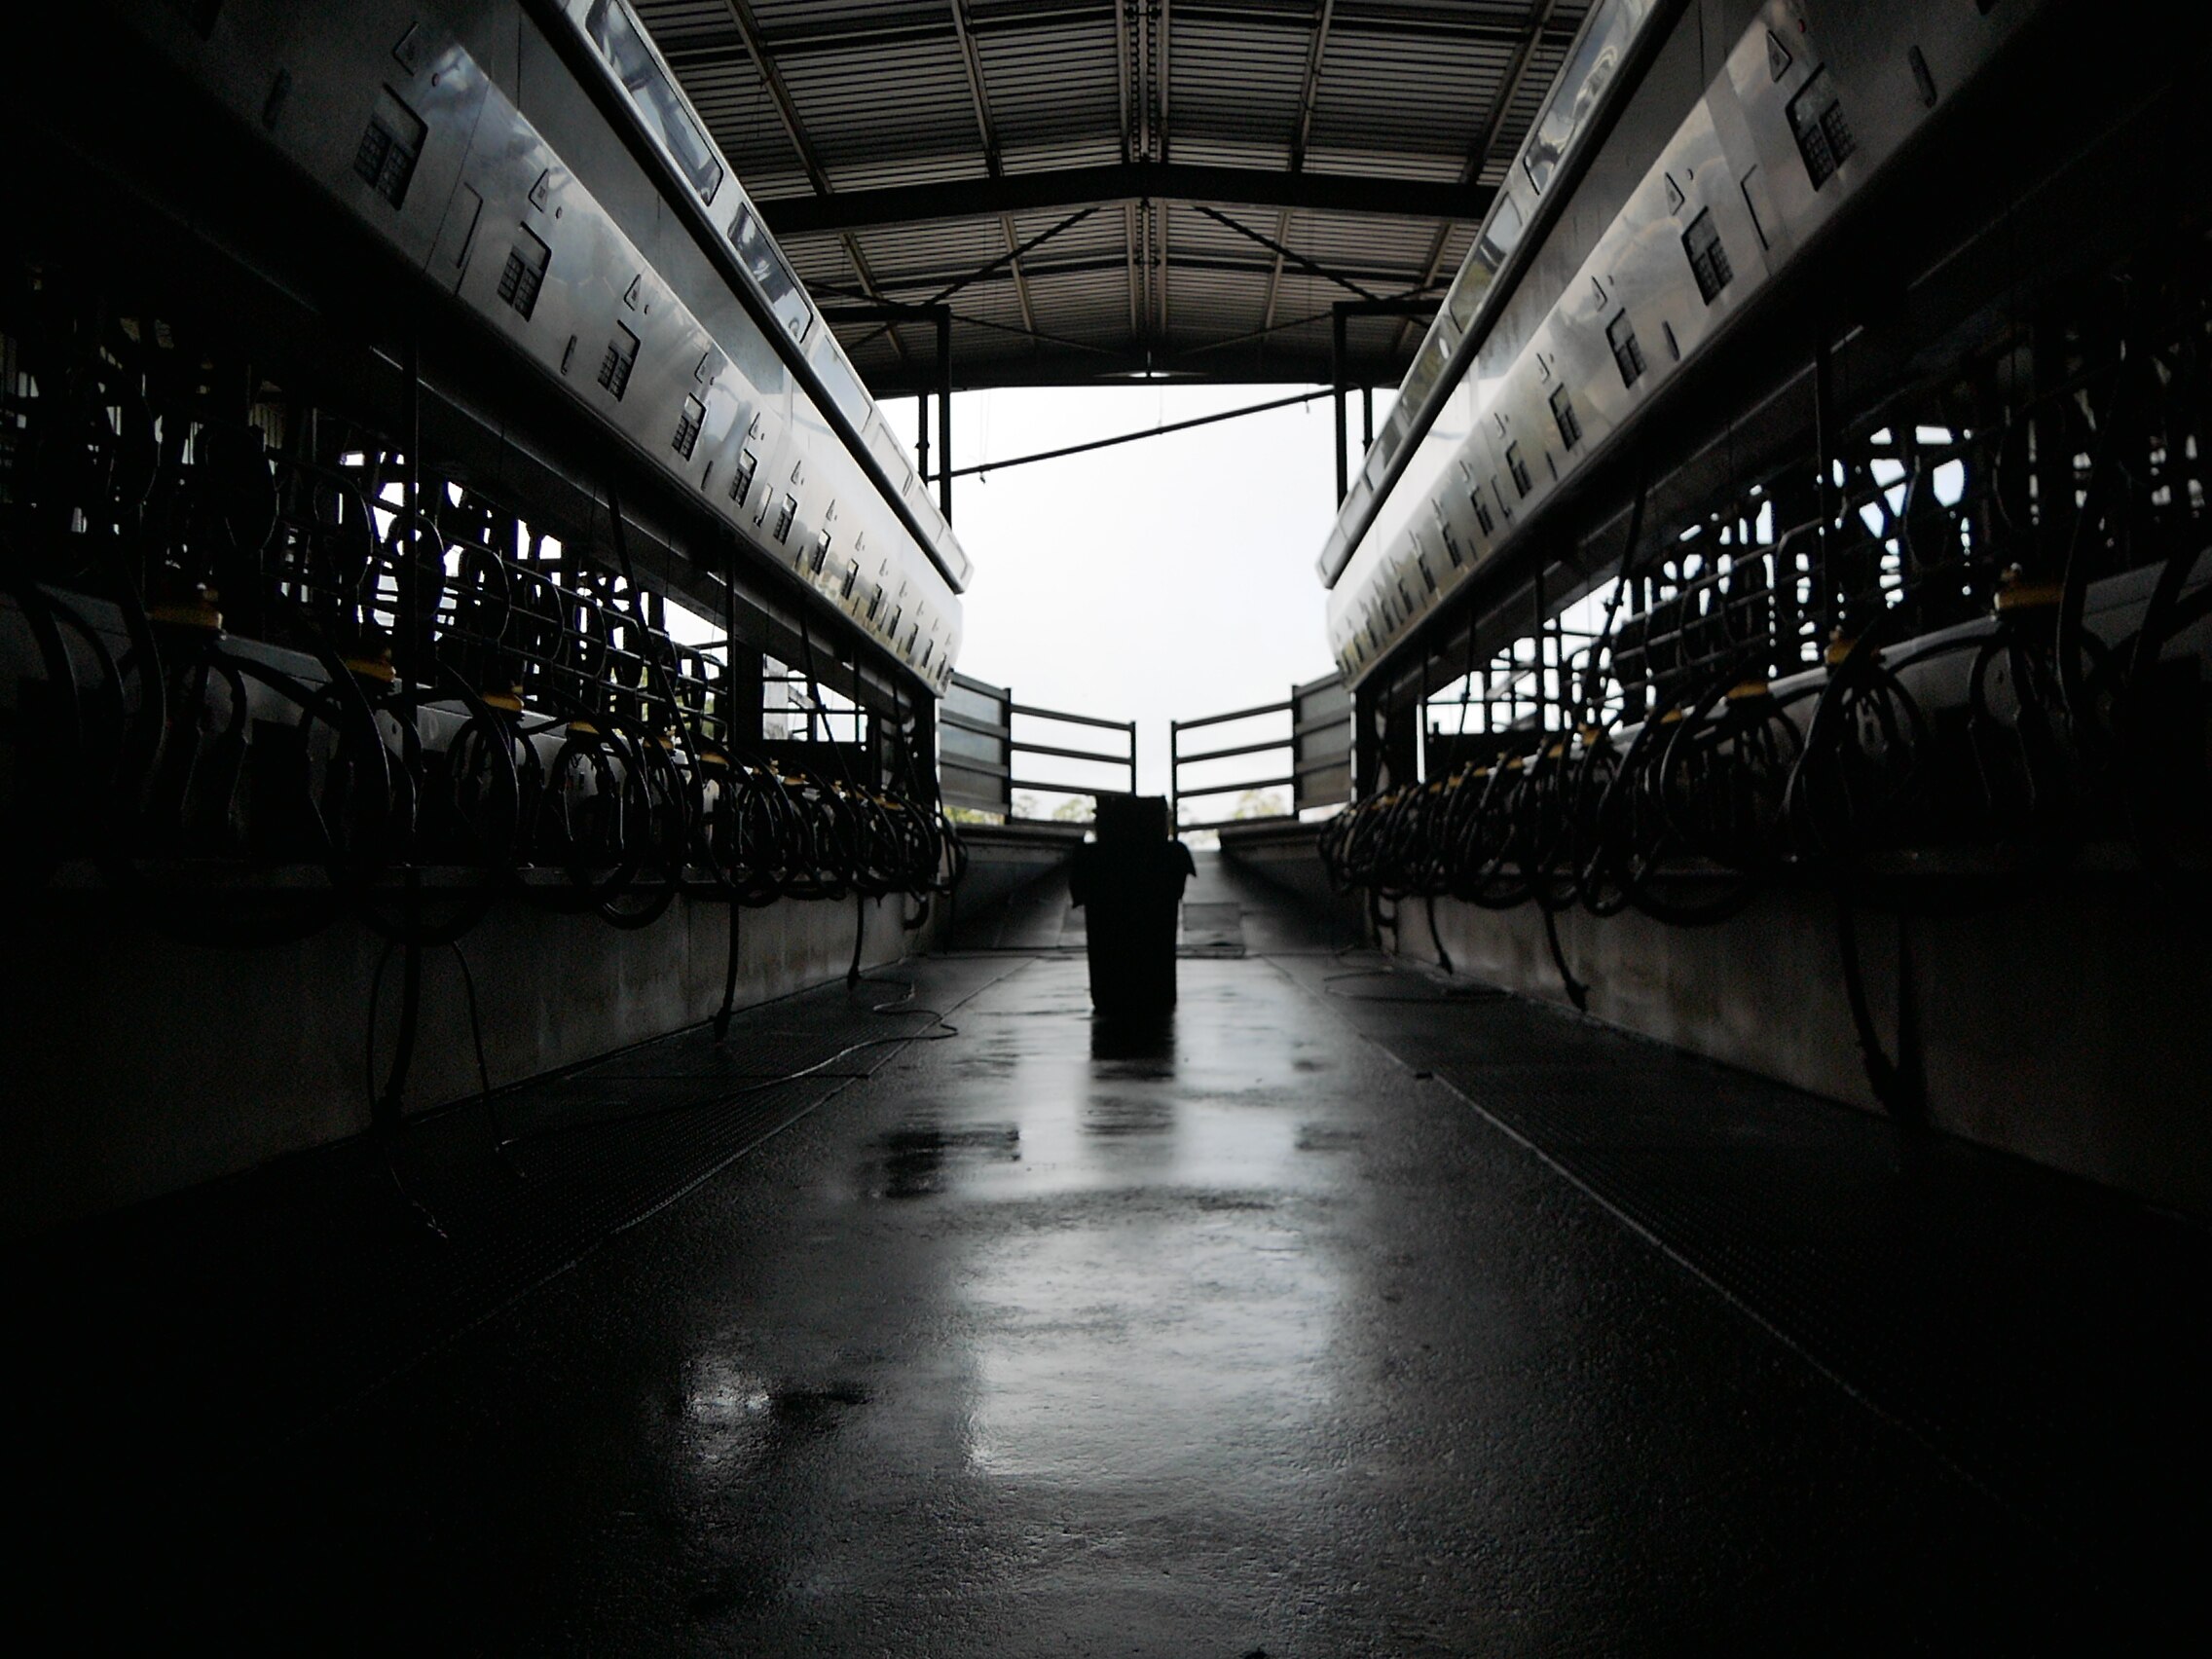 Looking out from inside a darkened dairy into the bright sunlight. The view is between tow rows of milking machines